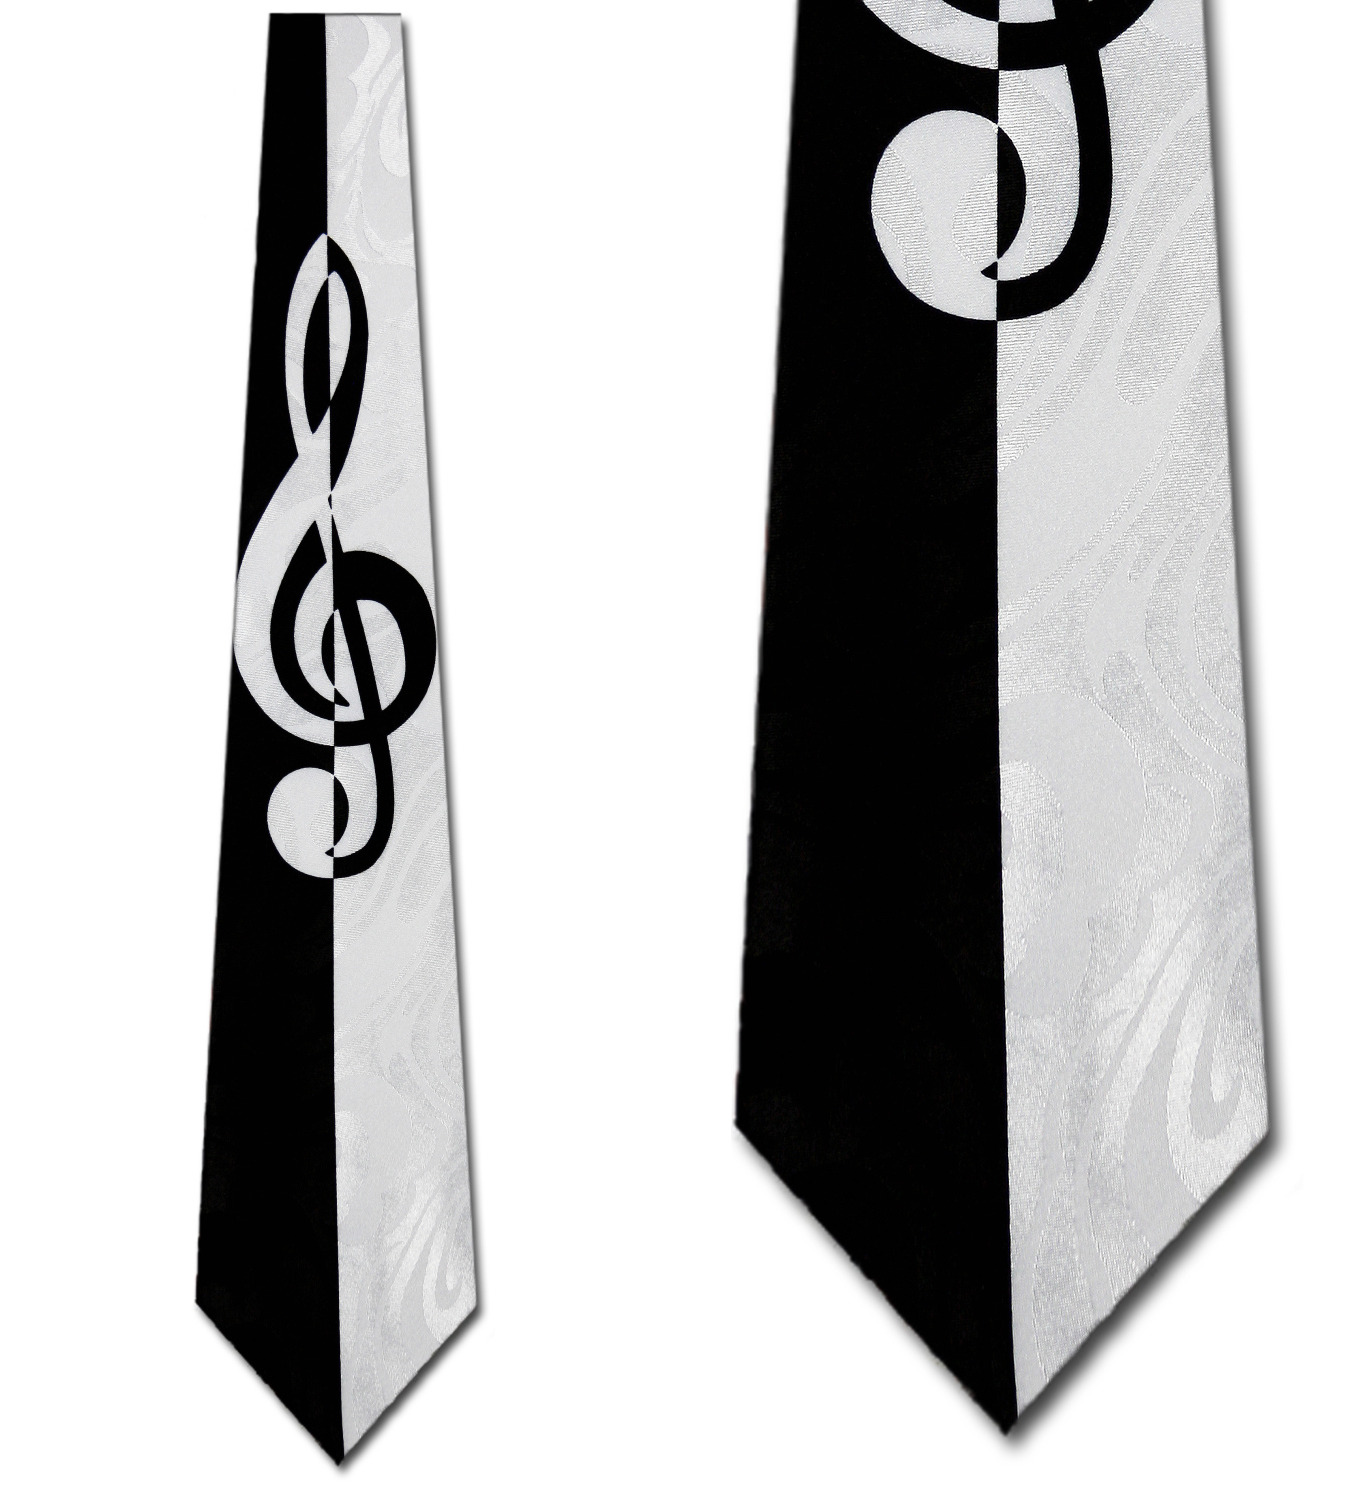 G Clef Black and White Necktie Mens Tie by Steven - image 1 of 3